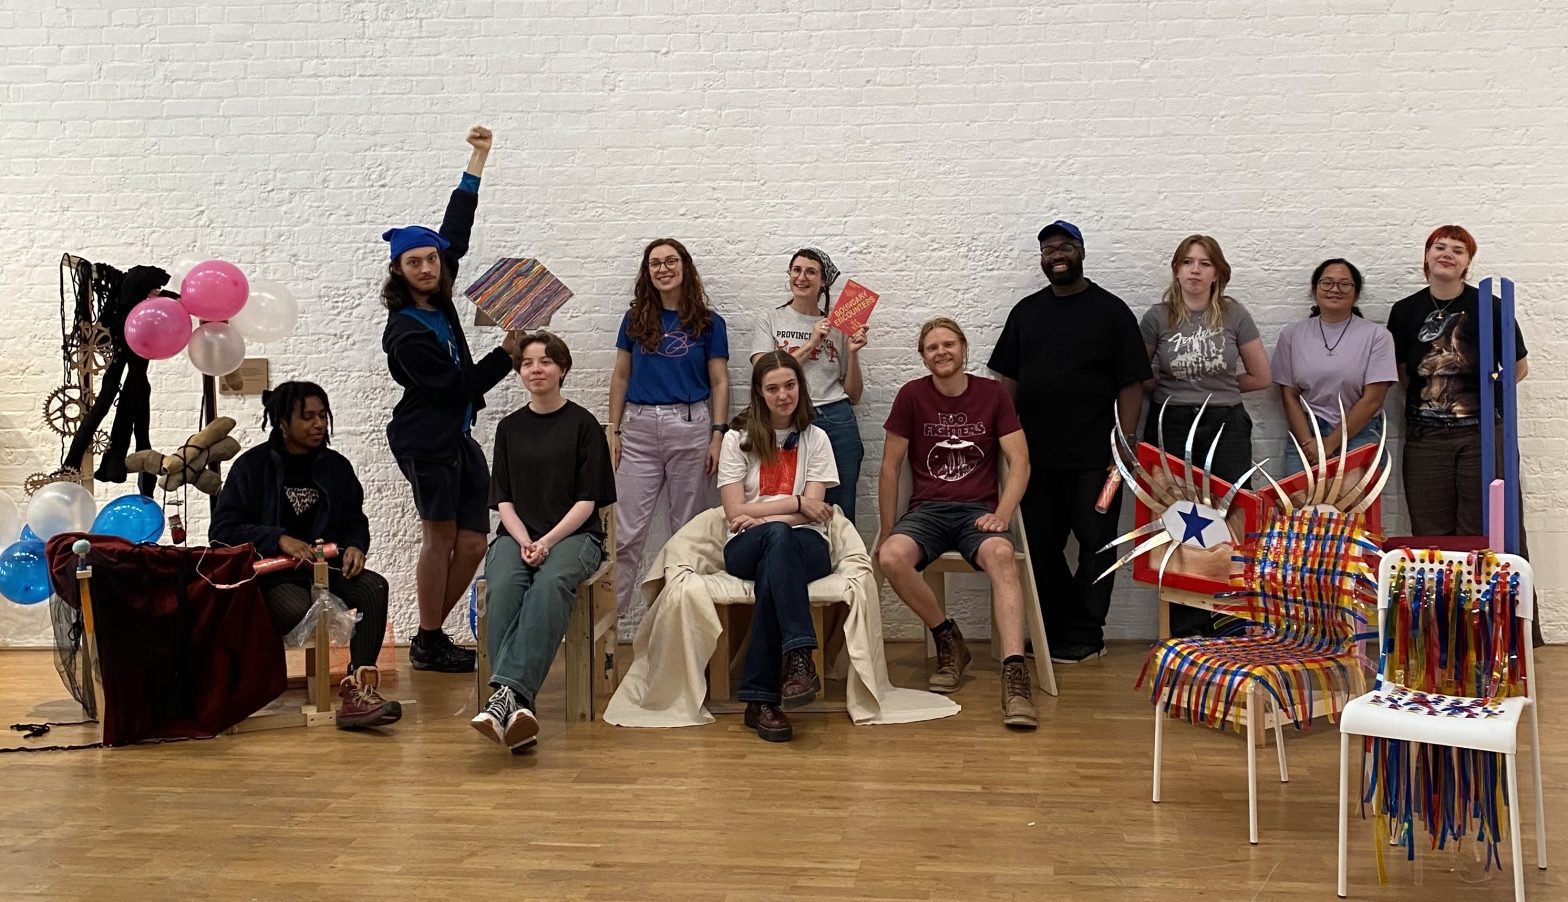 Photograph of Young Creatives at Boundary Encounter, posing with decorative chairs.